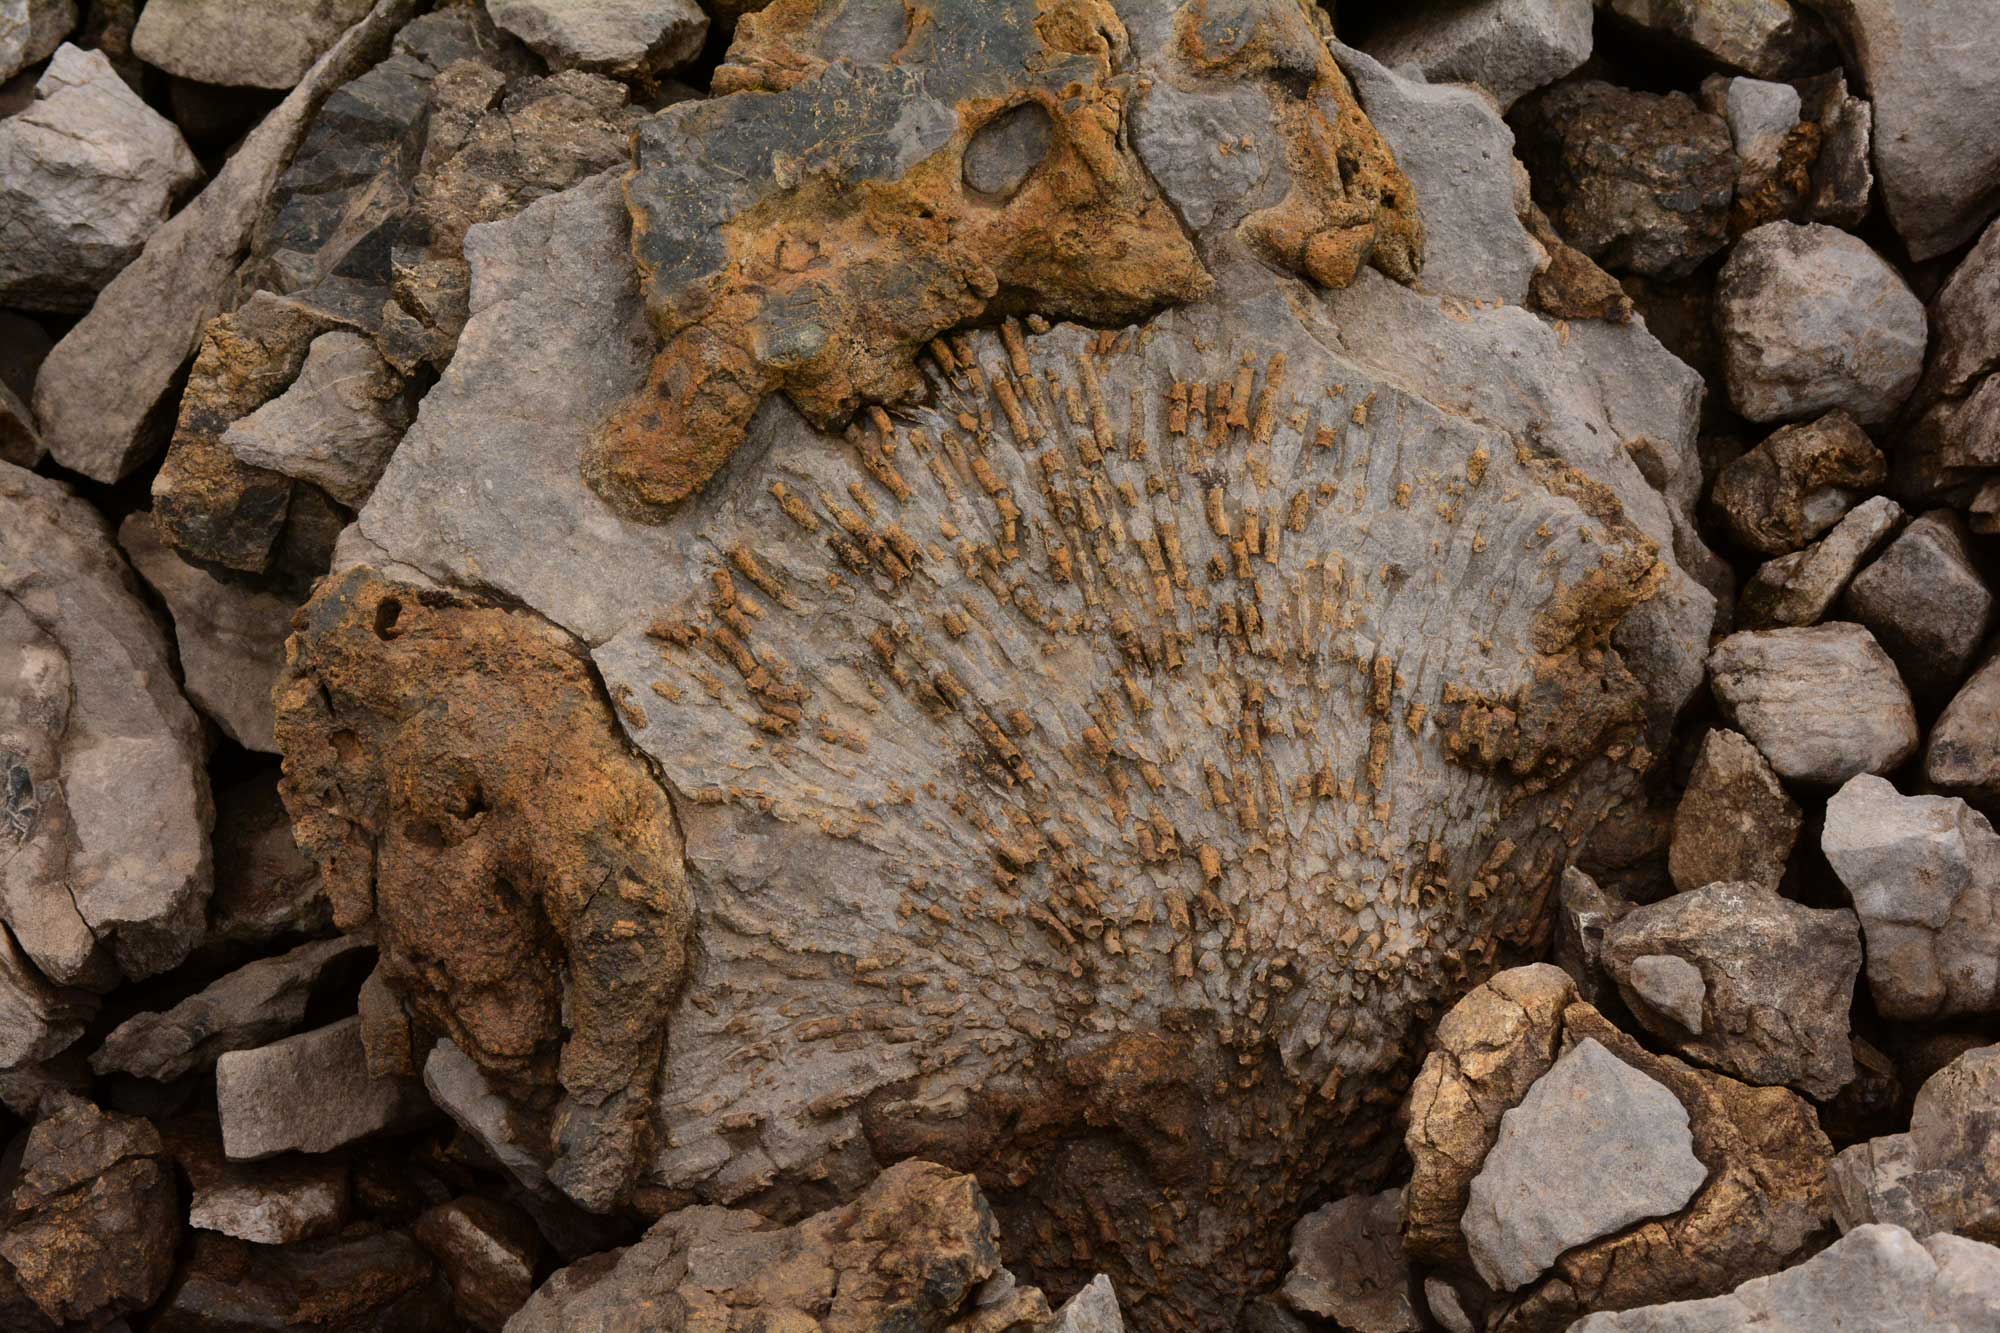 Photograph showing a chunk of gray rock with orange-brown, raised, tube-like areas that are the remains of a fossil coral. The fossil sits on a bed of gravel.